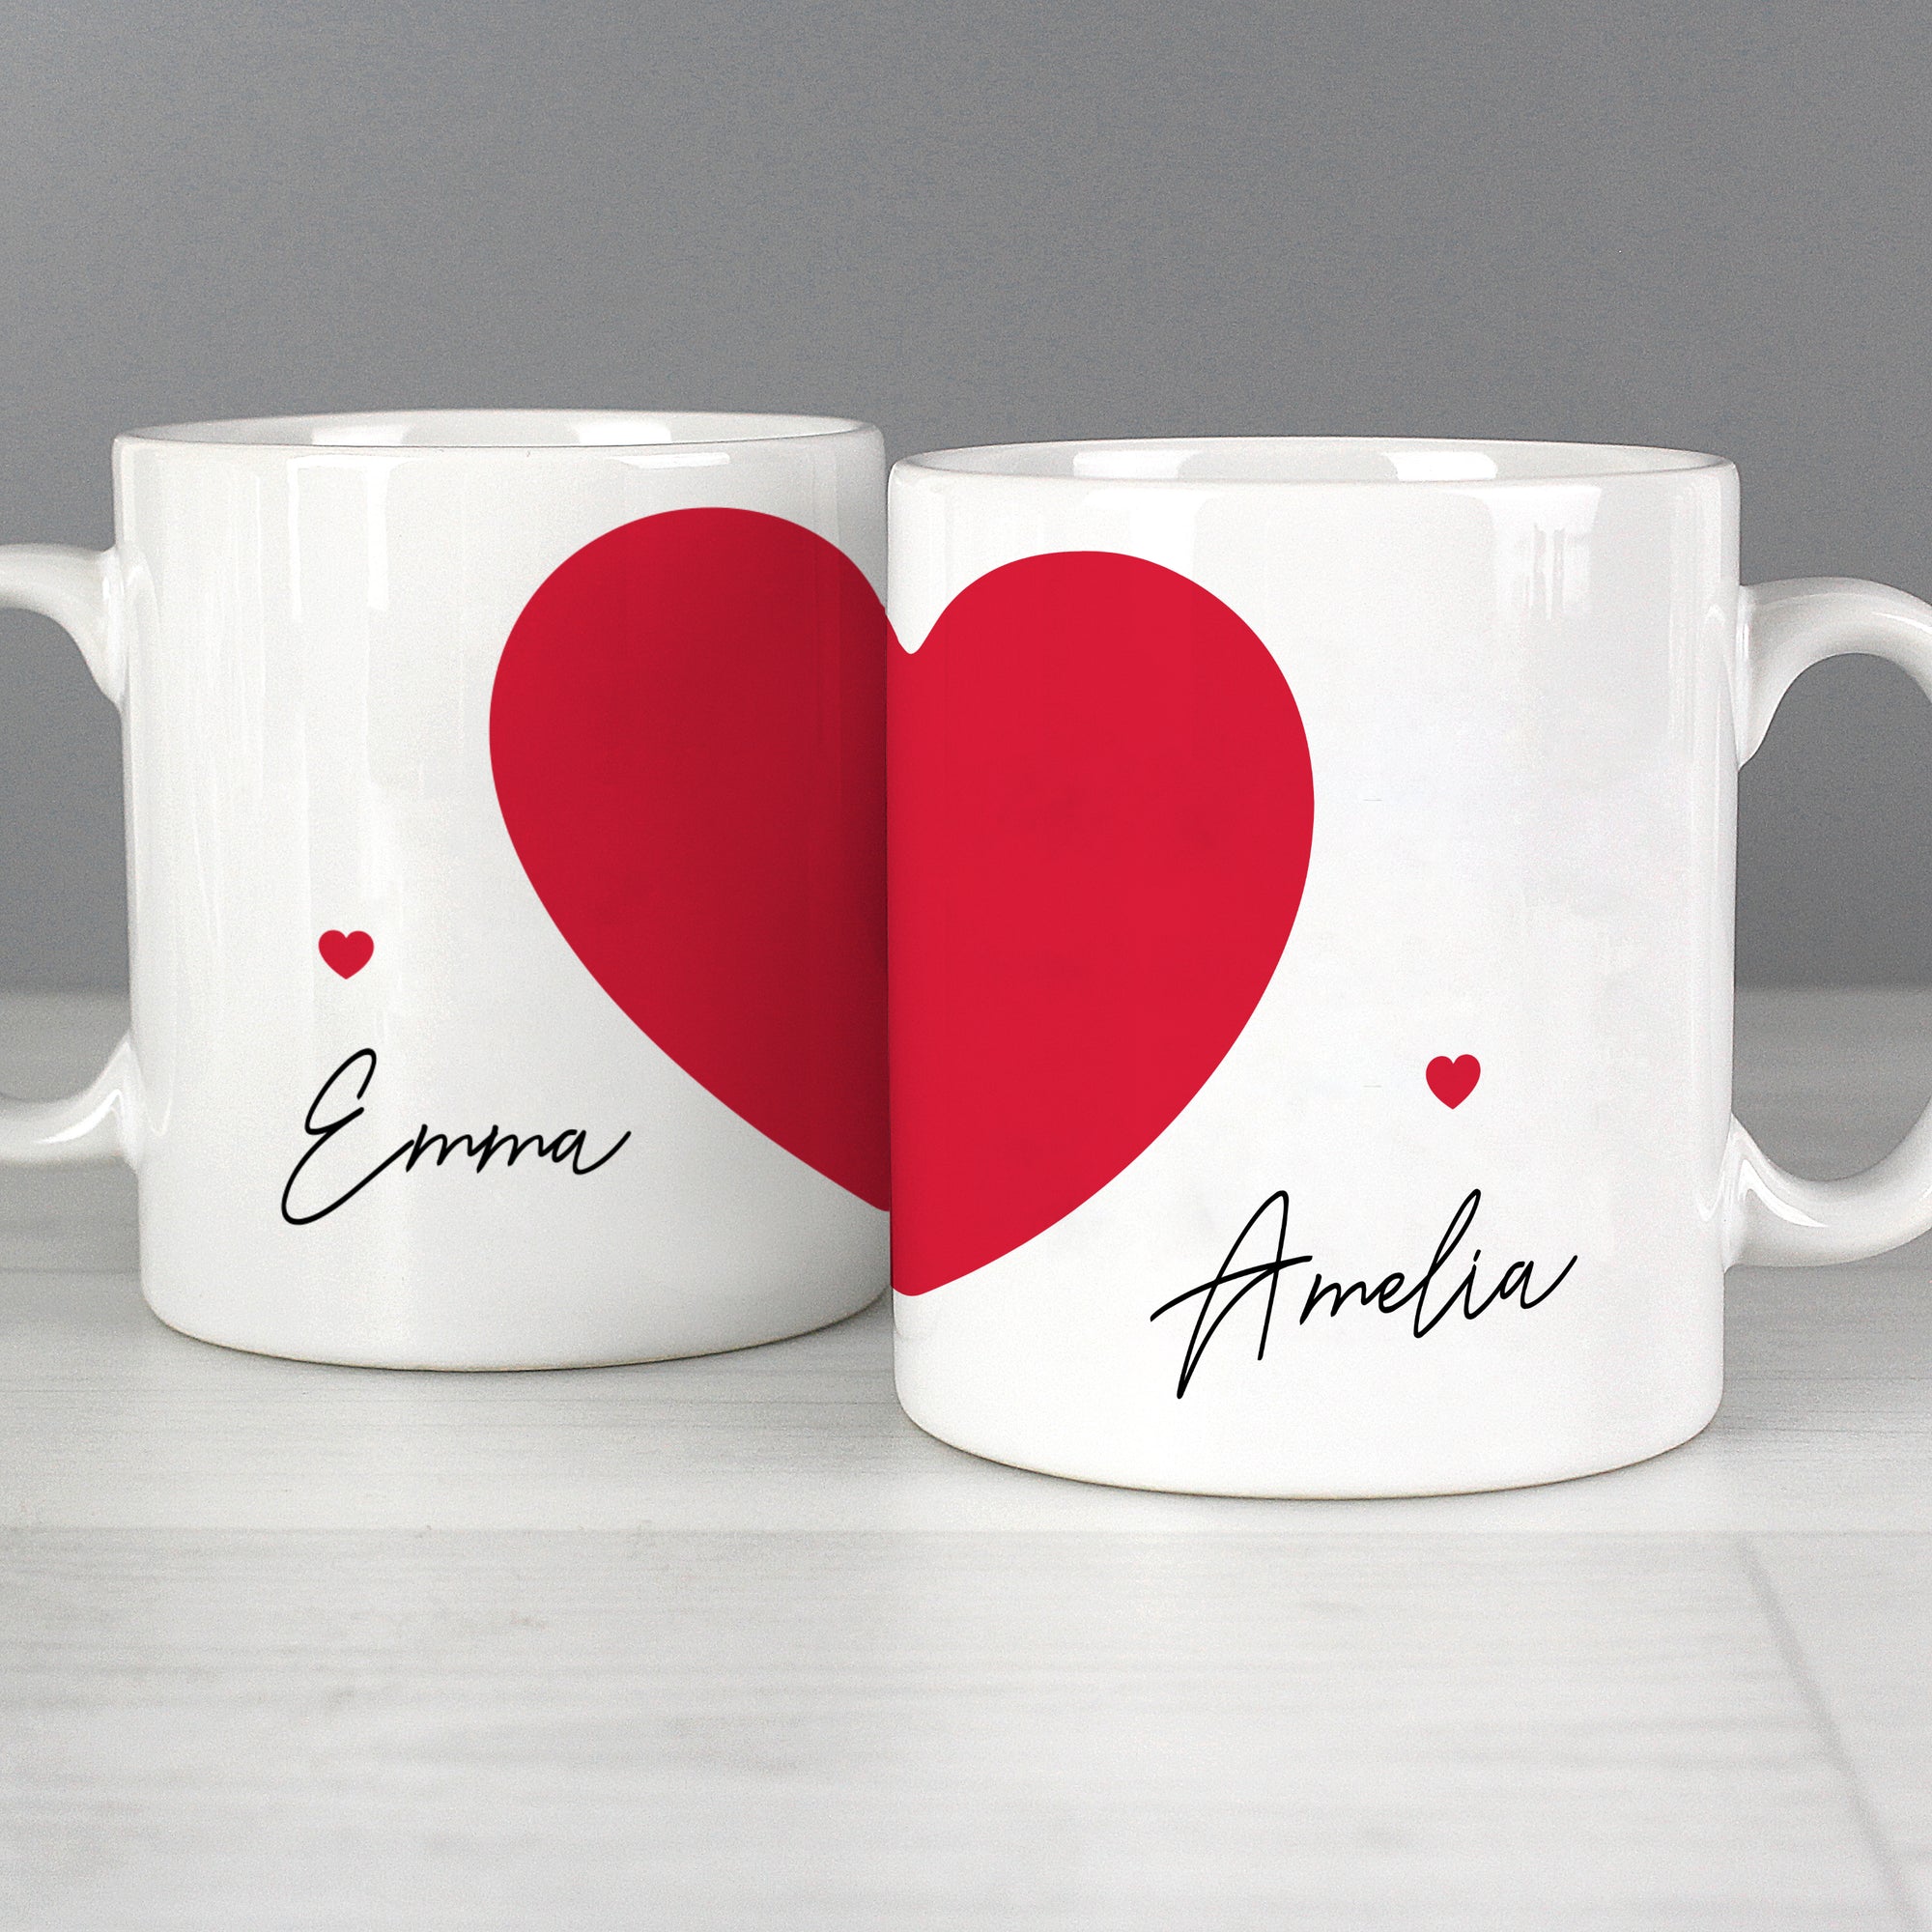 Image of a pair of white ceramic mugs and each mug has a large red heart printed on it as well as a smaller red heart.  Each mug can be personalised with a name of your choice which will be printed in a black handwriting font.